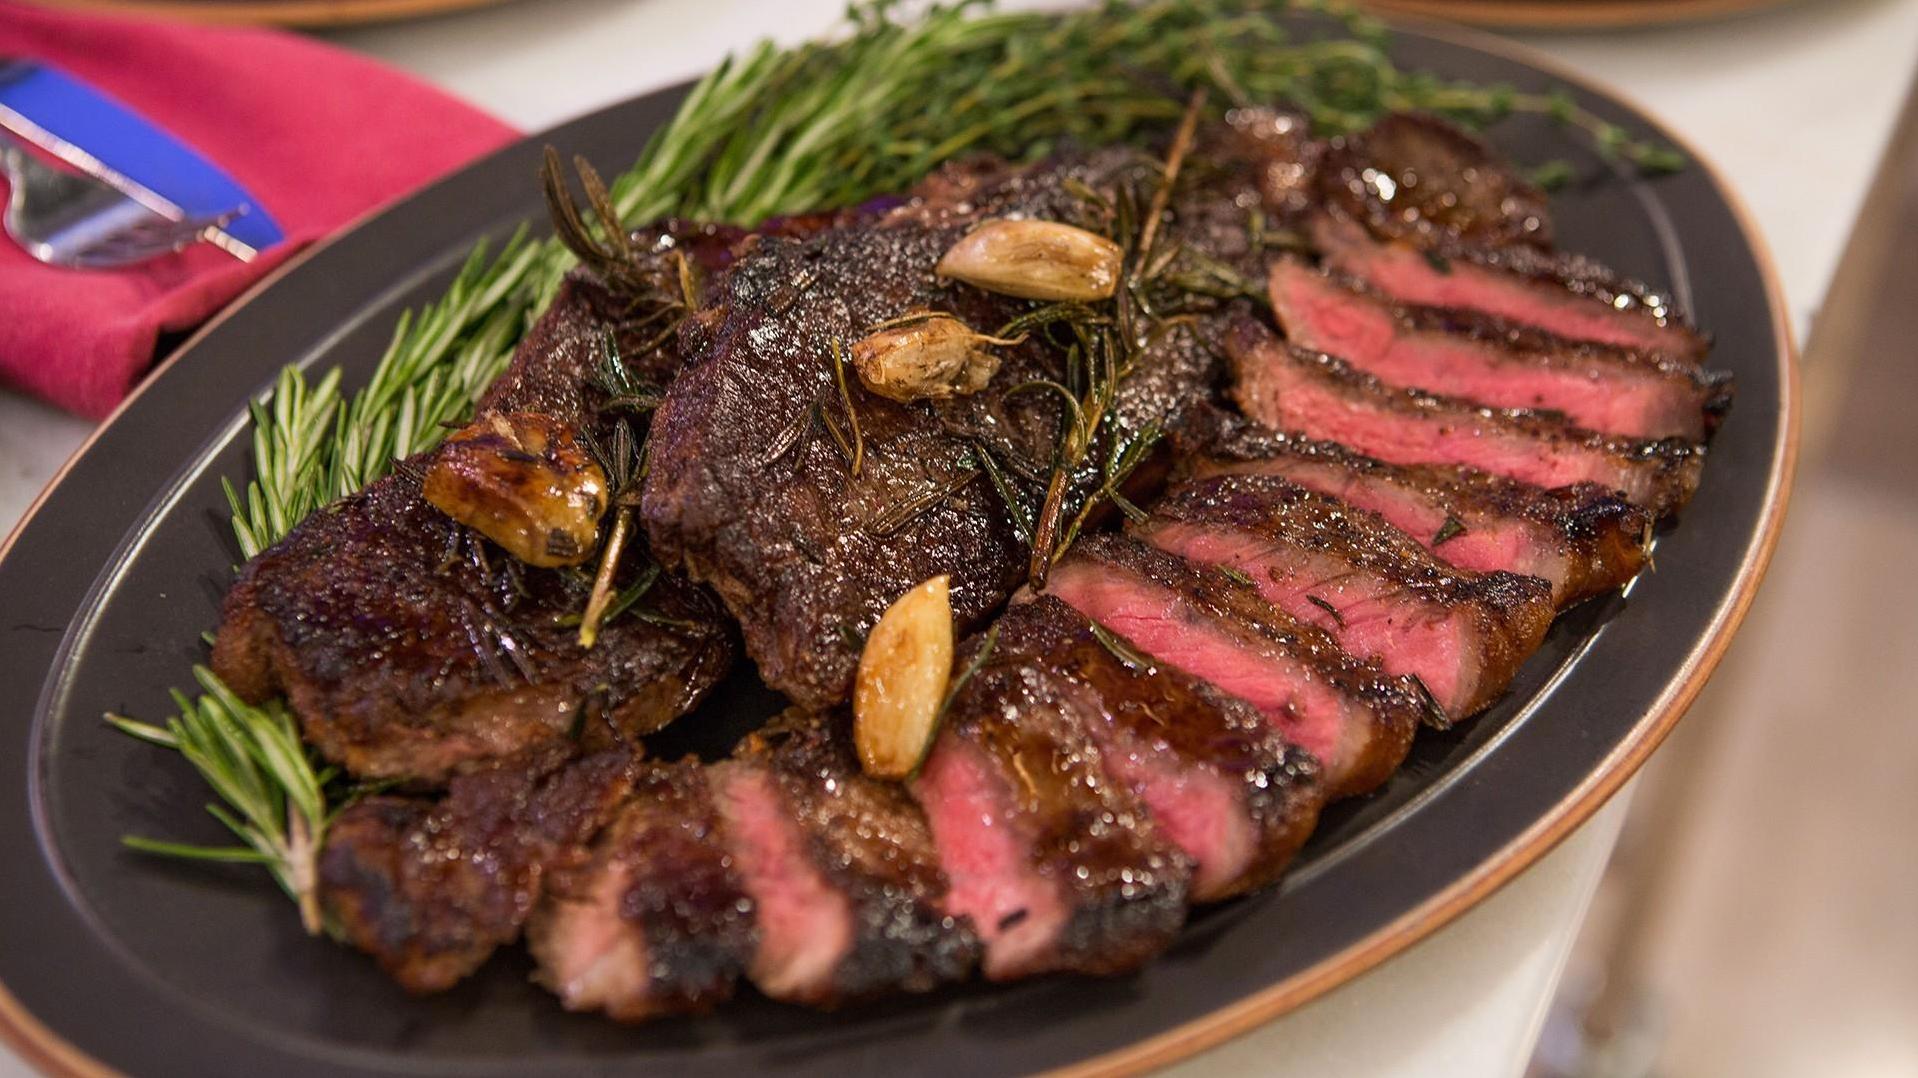  Tender and succulent, these red wine steaks are a carnivore's delight.